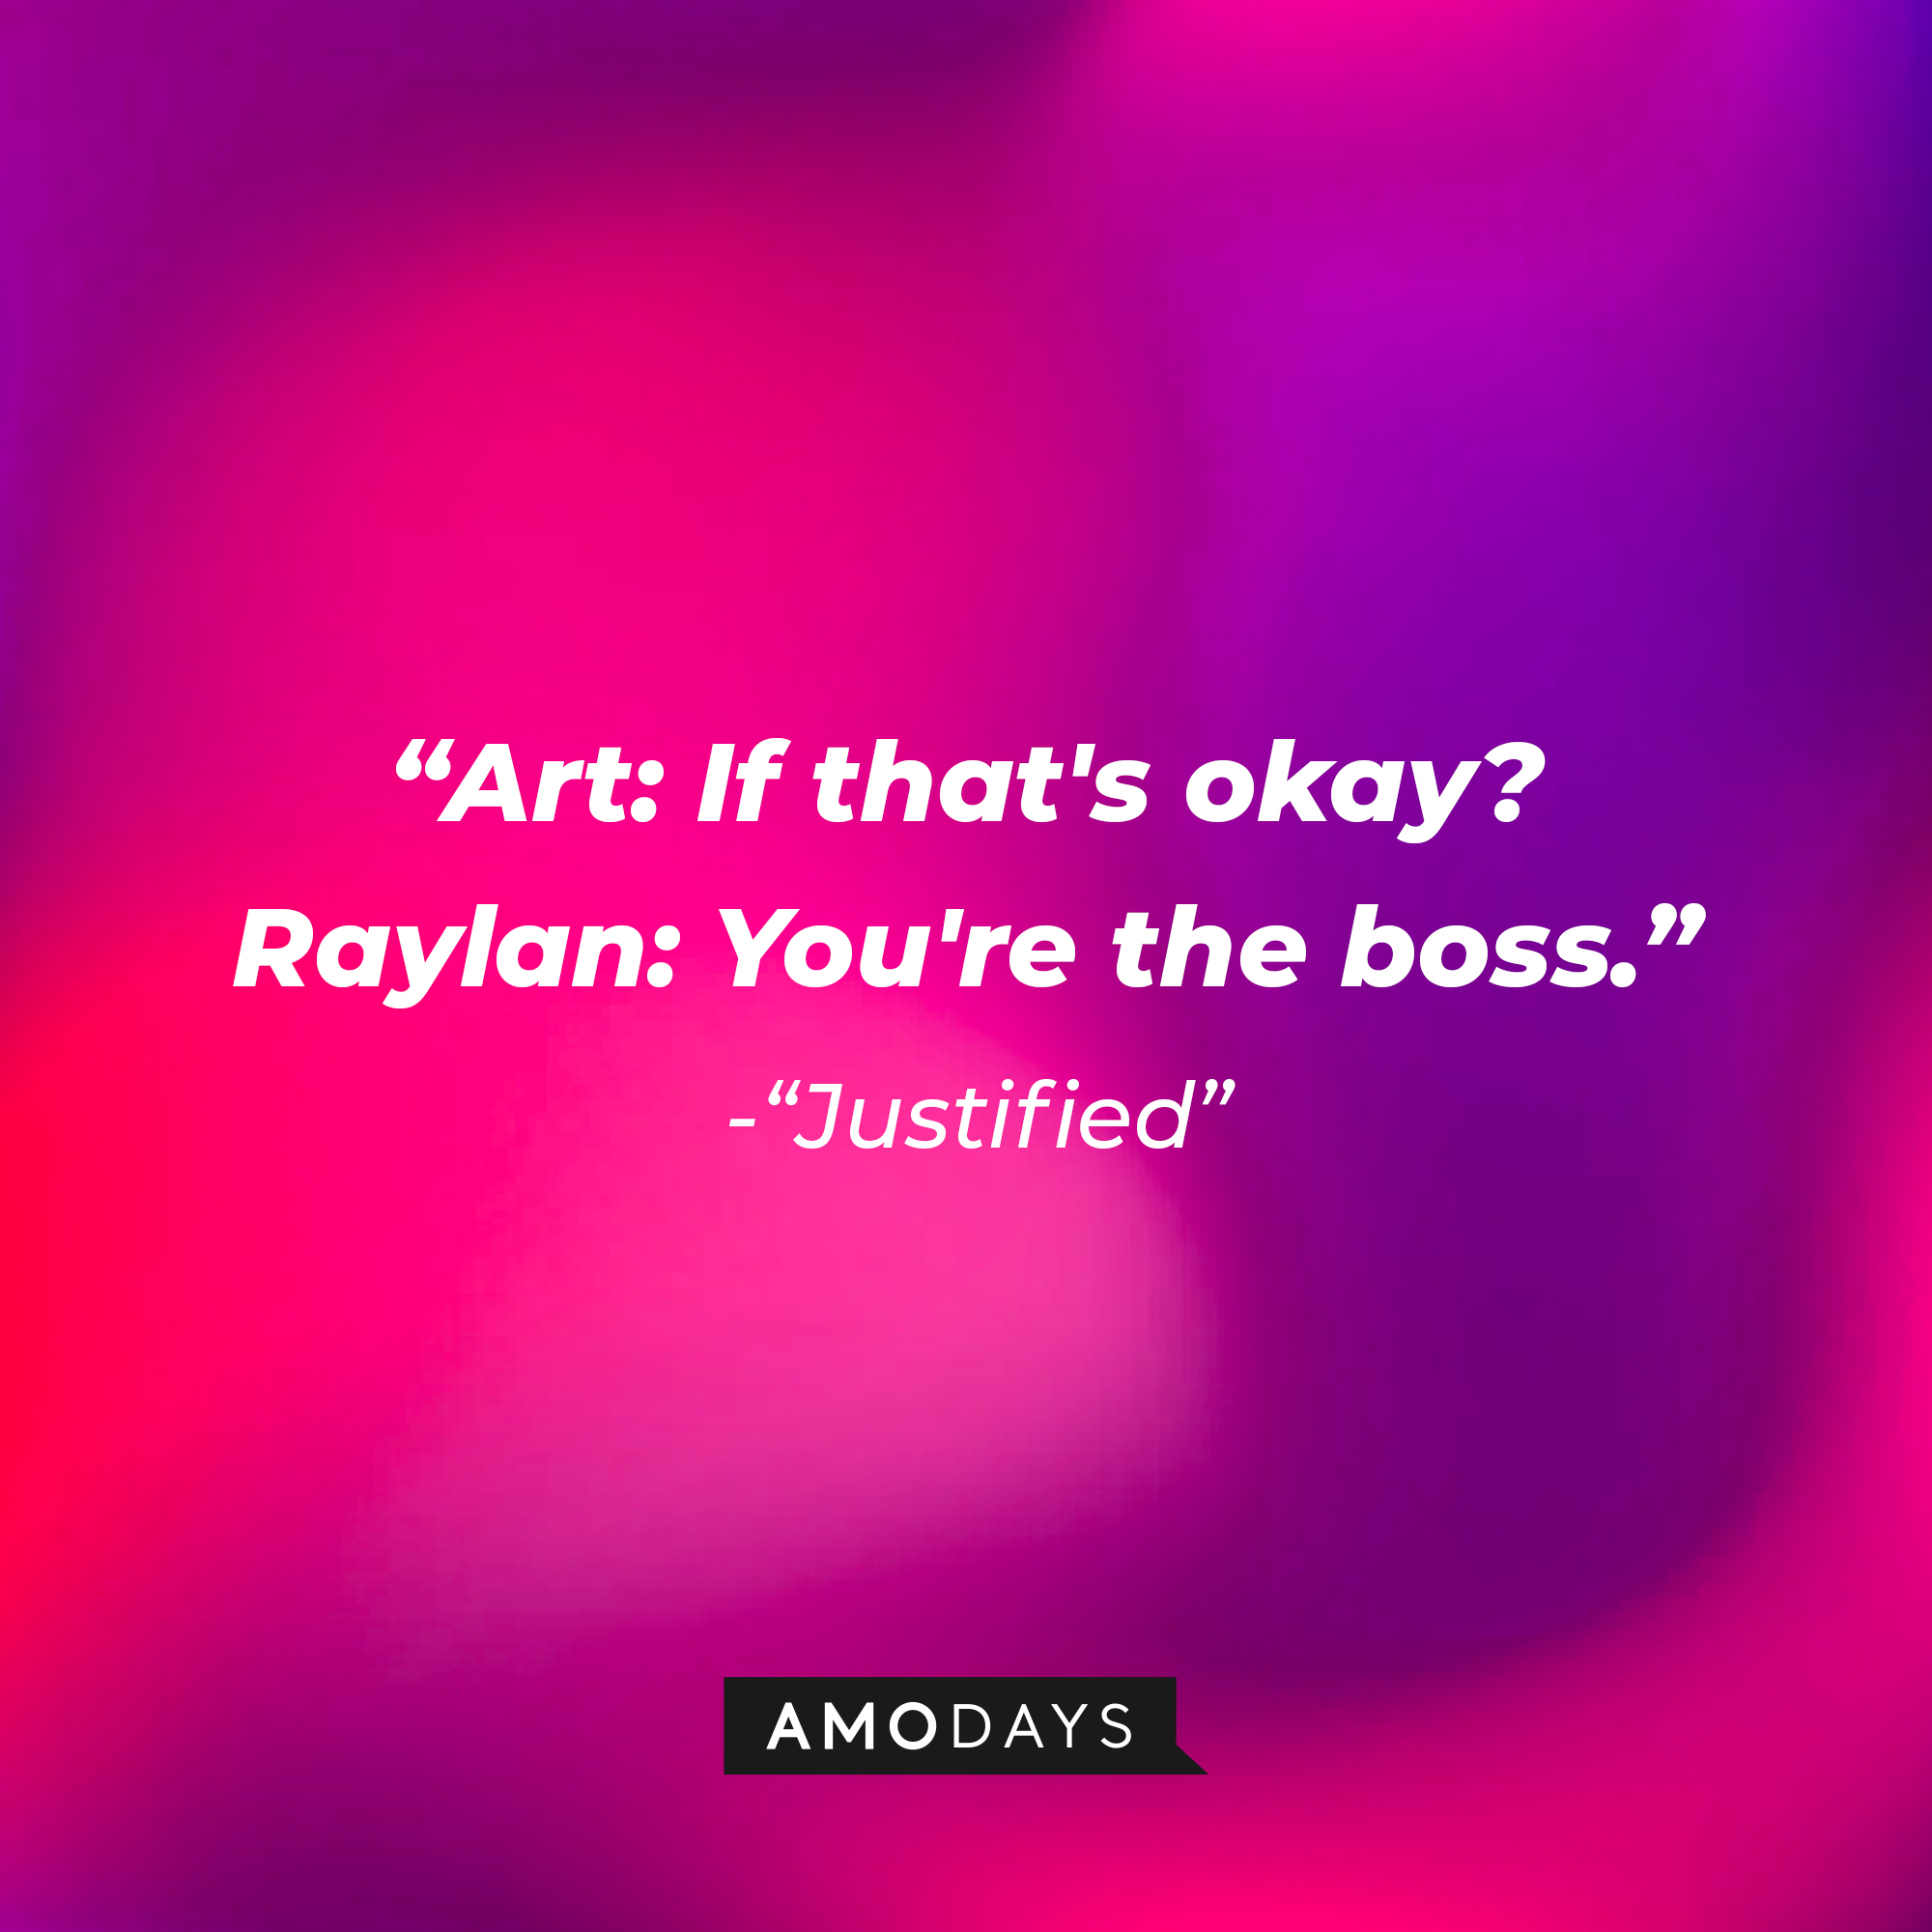 Quote from “Justified”: “Art: If that's okay? Raylan: You're the boss.” | Source: AmoDays